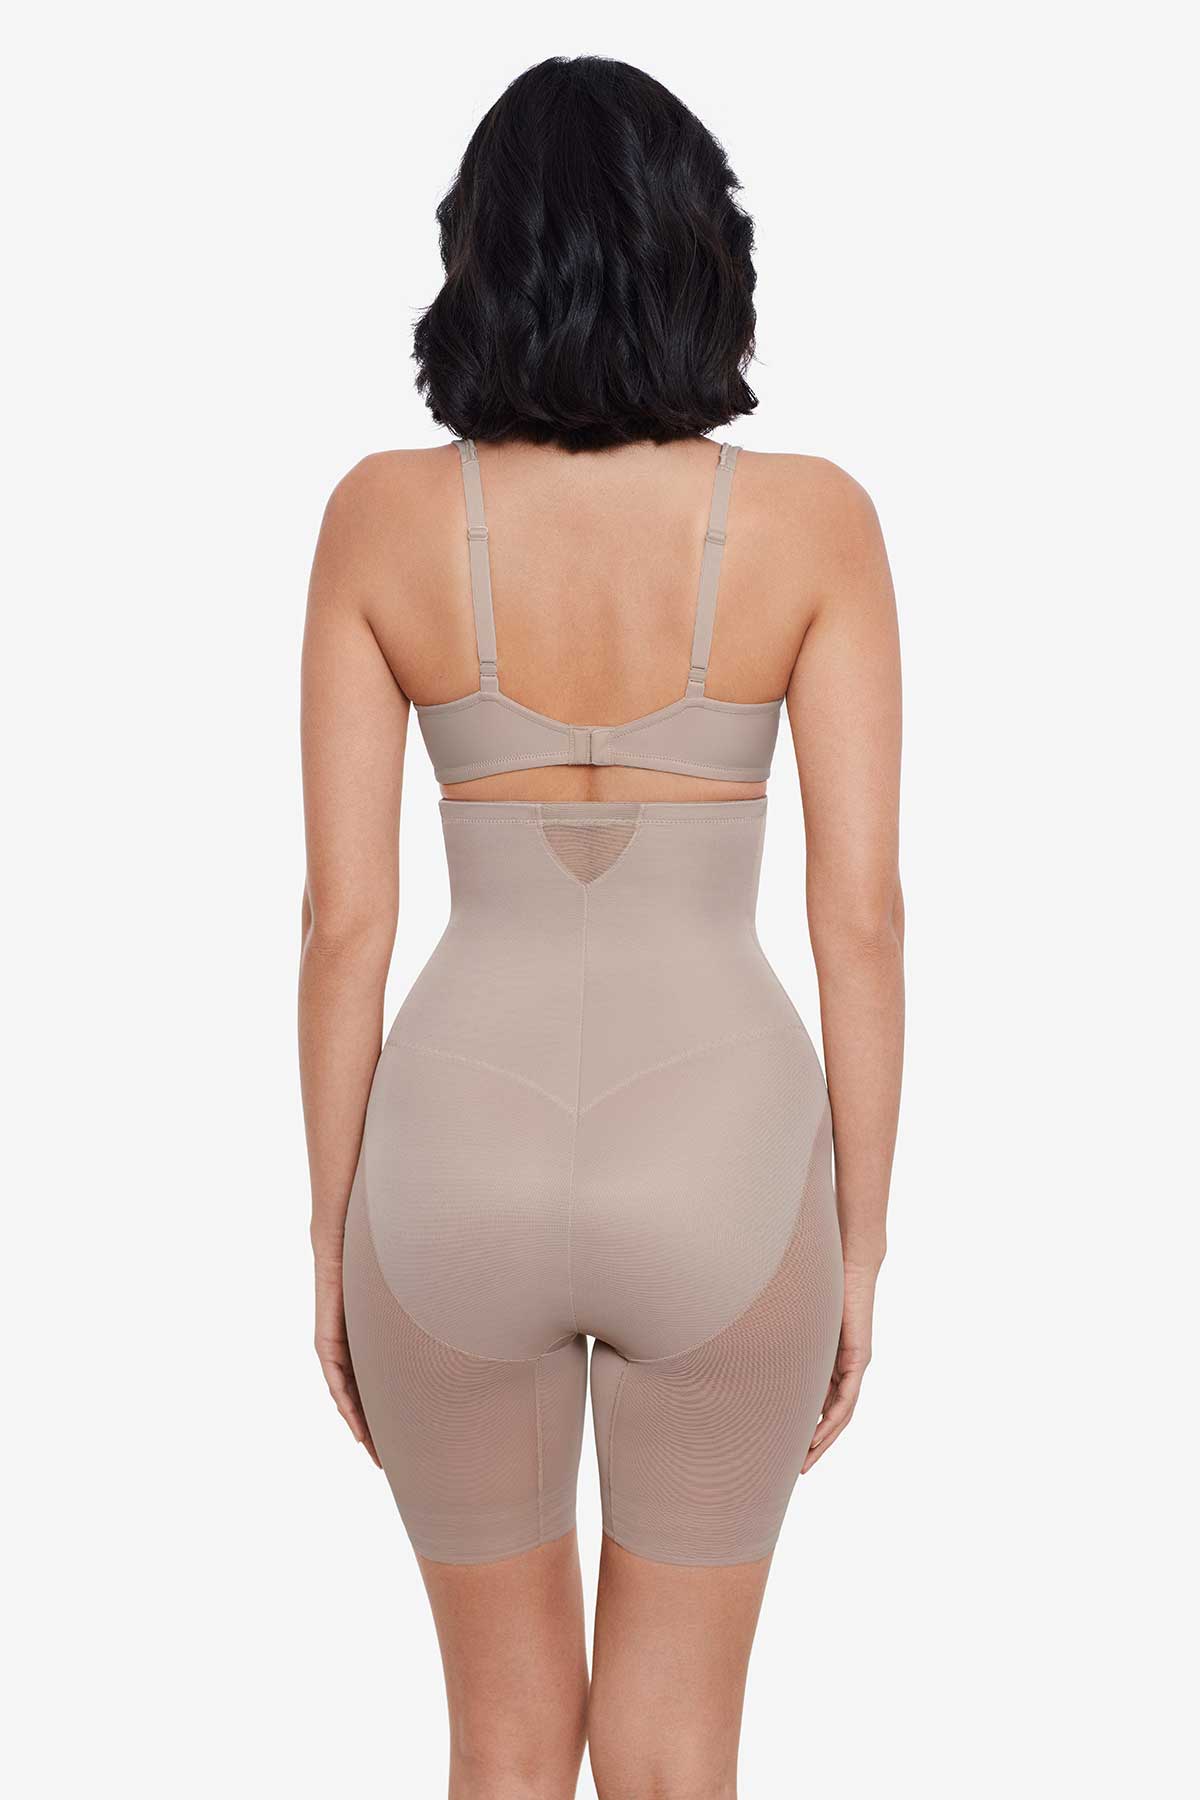 Buy Miraclesuit High Waisted Thigh Slimming Shapewear Shorts from